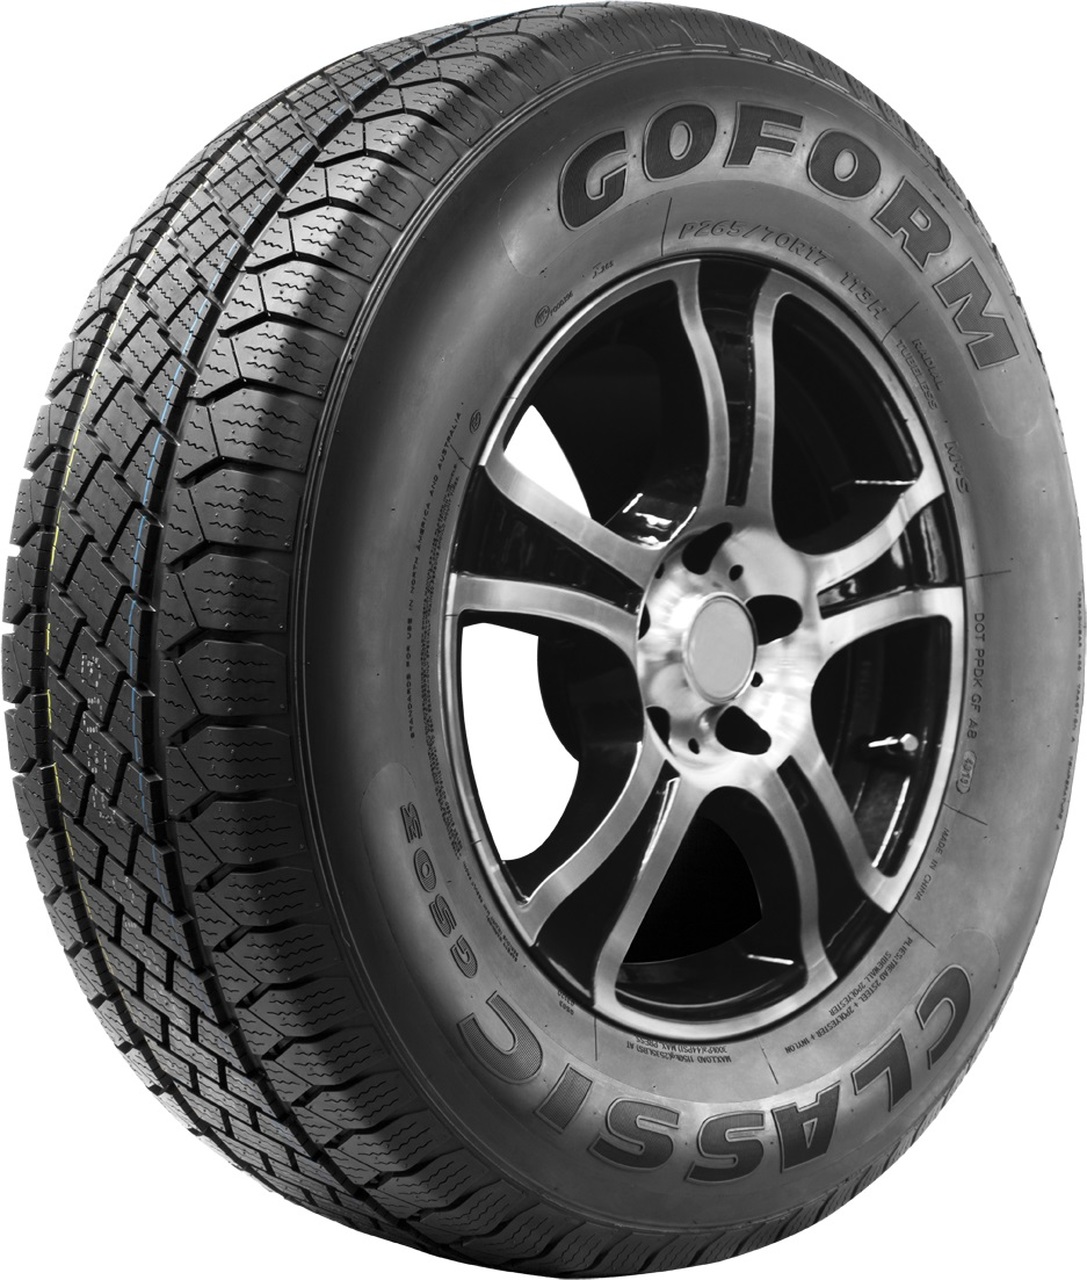 Anvelope jeep GOFORM ZO GS03 275/60 R20 114H